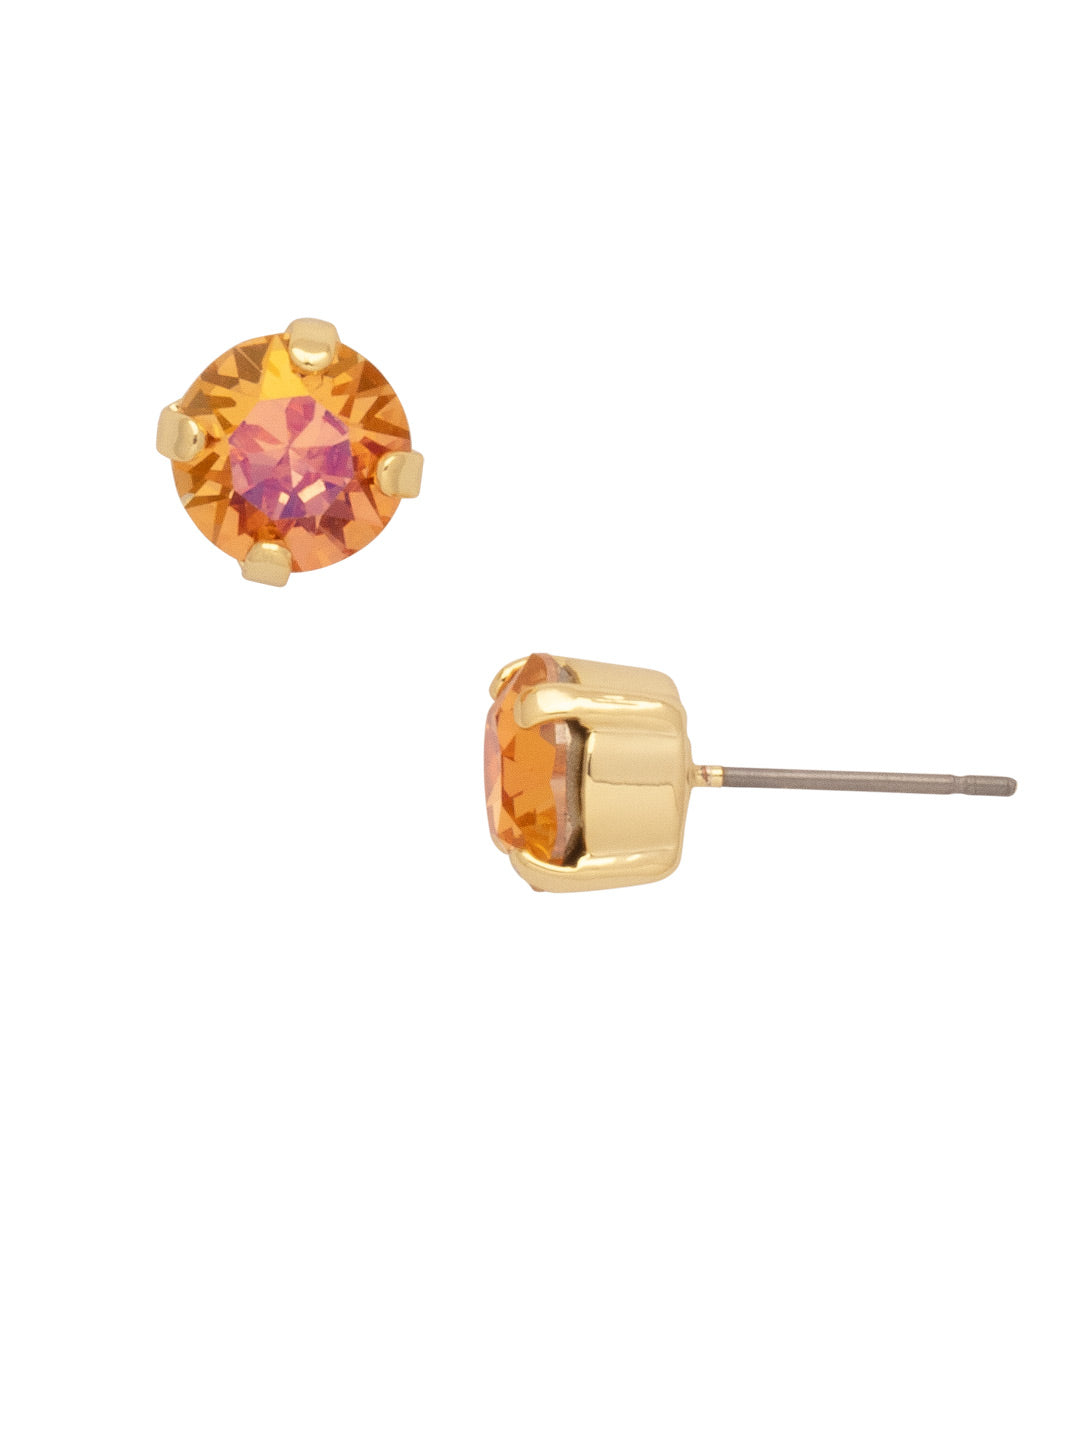 Simple Stud Earrings - EFC99BGMNG - <p>The Simple Stud Earrings feature a single solid crystal on a surgical steel post, creating a small but sparkly everyday staple! Need help picking a stud? <a href="https://www.sorrelli.com/blogs/sisterhood/round-stud-earrings-101-a-rundown-of-sizes-styles-and-sparkle">Check out our size guide!</a> From Sorrelli's Mango Tango collection in our Bright Gold-tone finish.</p>